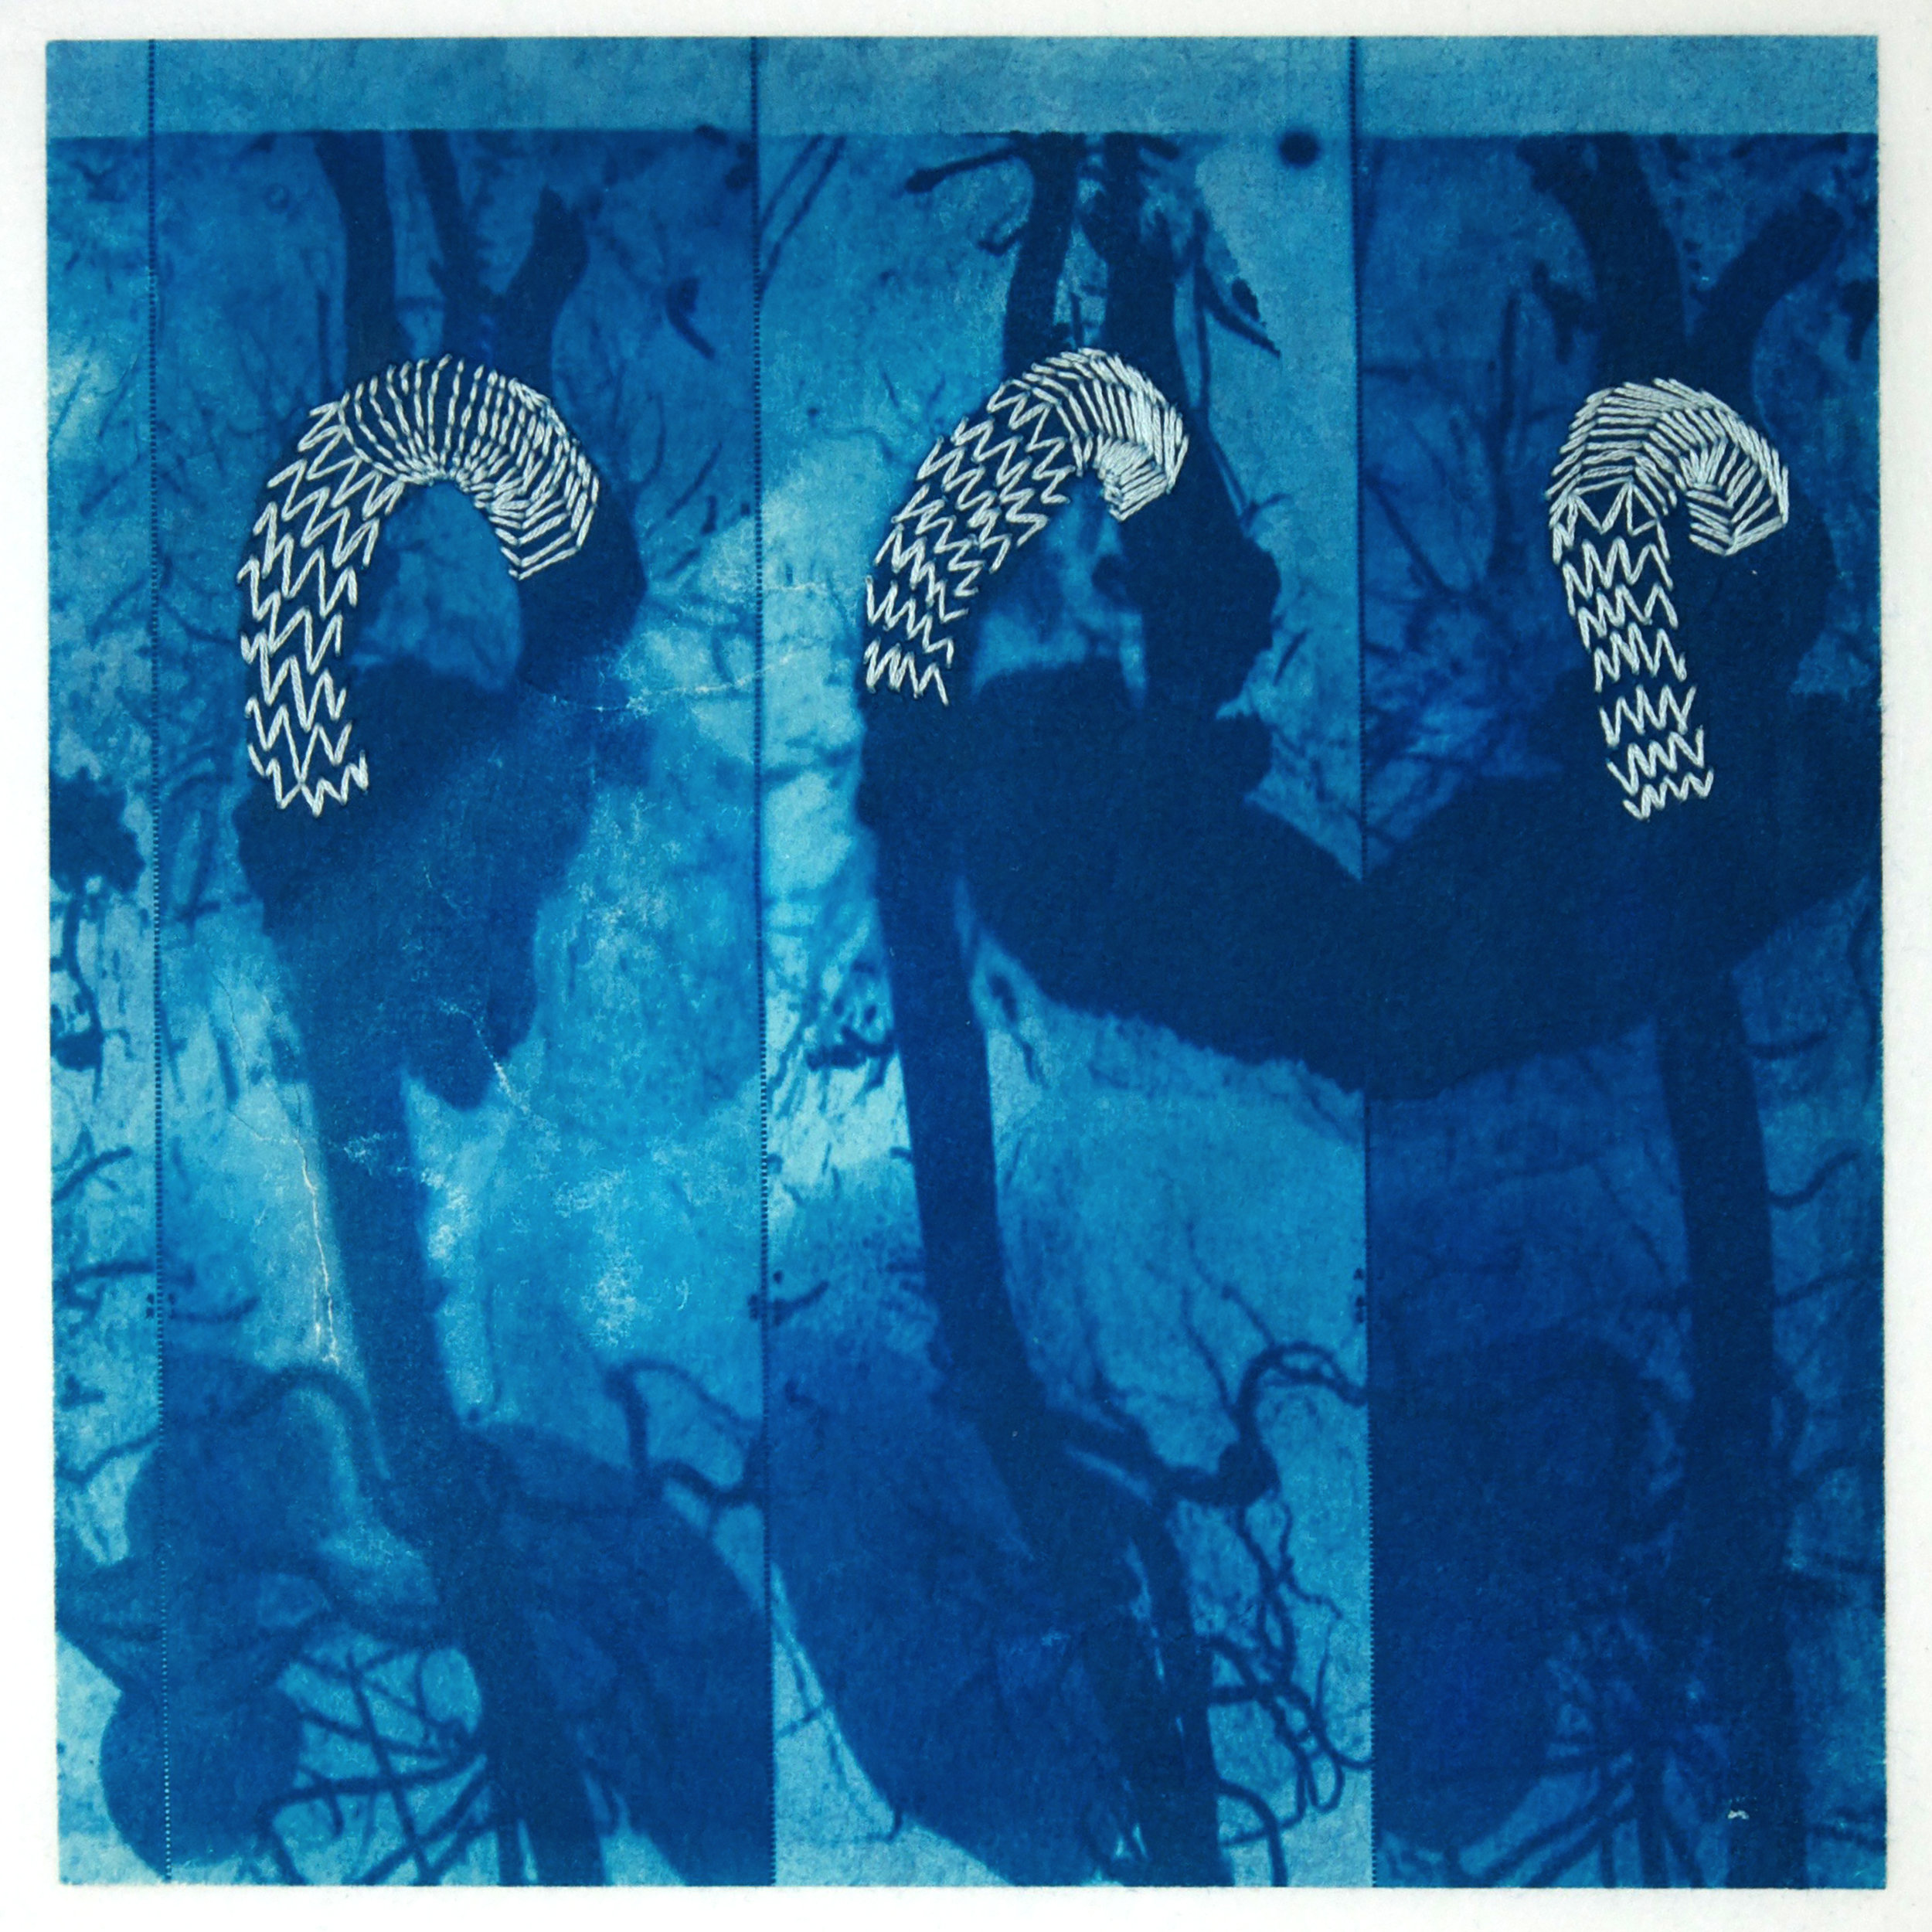 Michele Lane, Conduit #2' (detail), cyanotype with embroidery (unique state) (Copy)